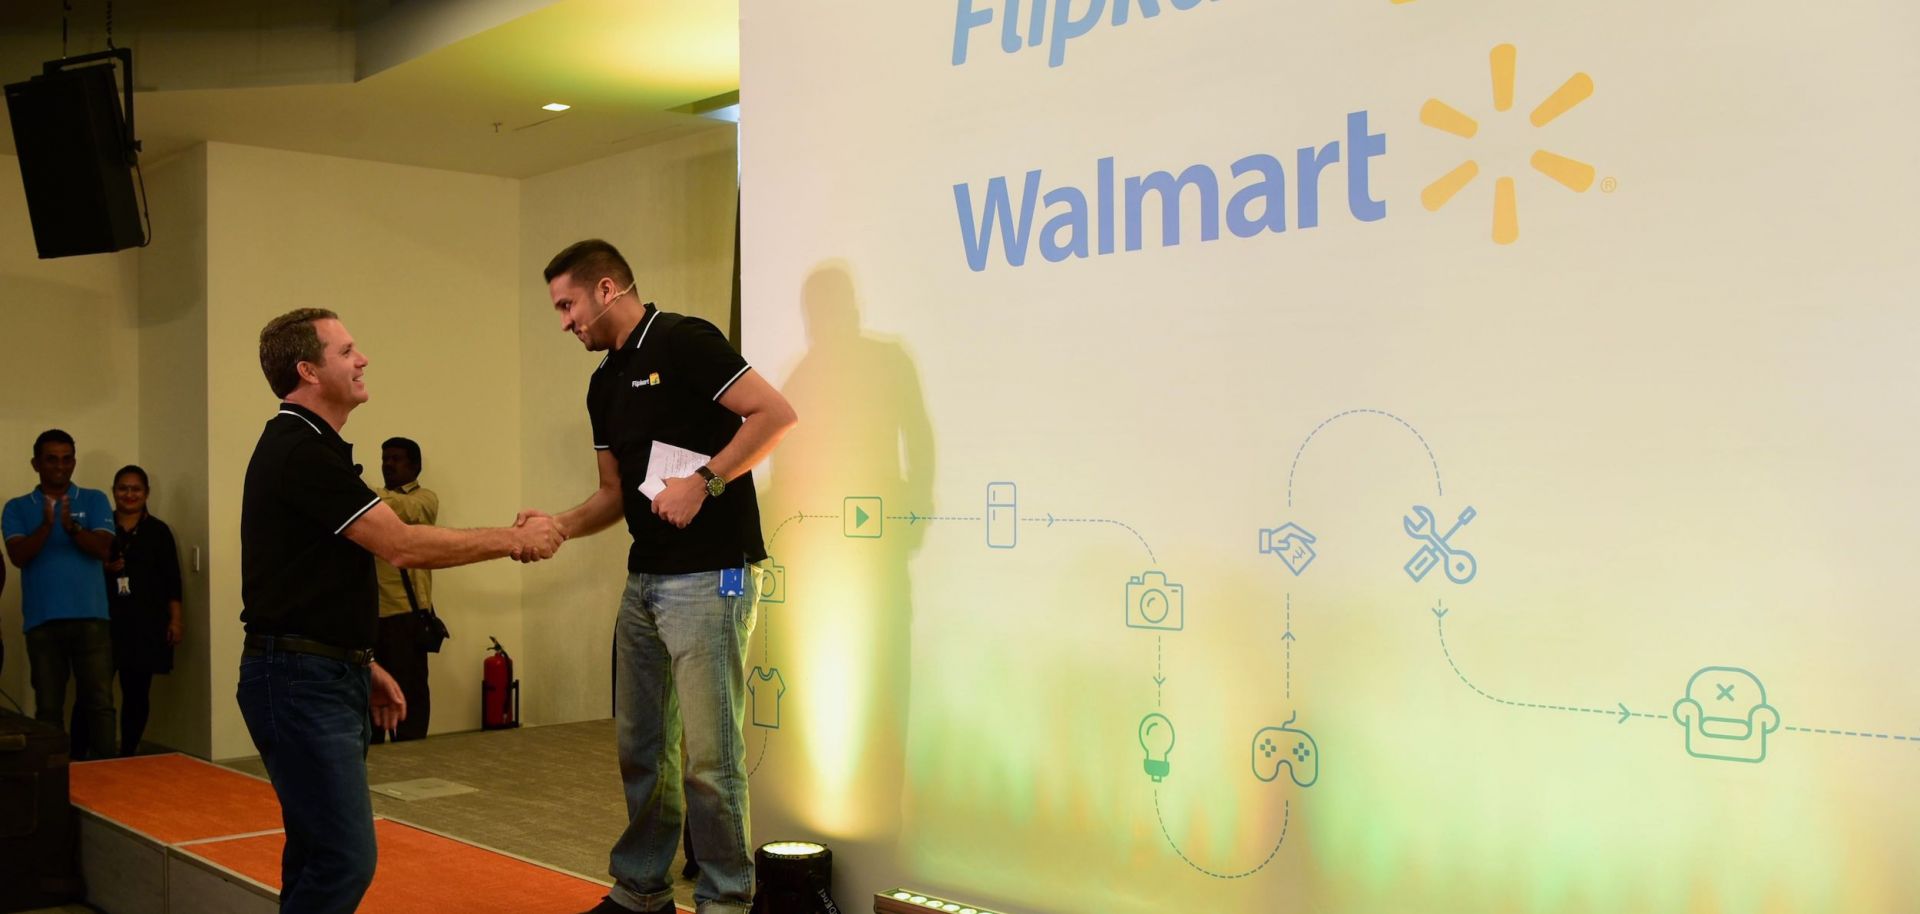 The CEOS of Walmart and Flipkart shake hands at an event in India.